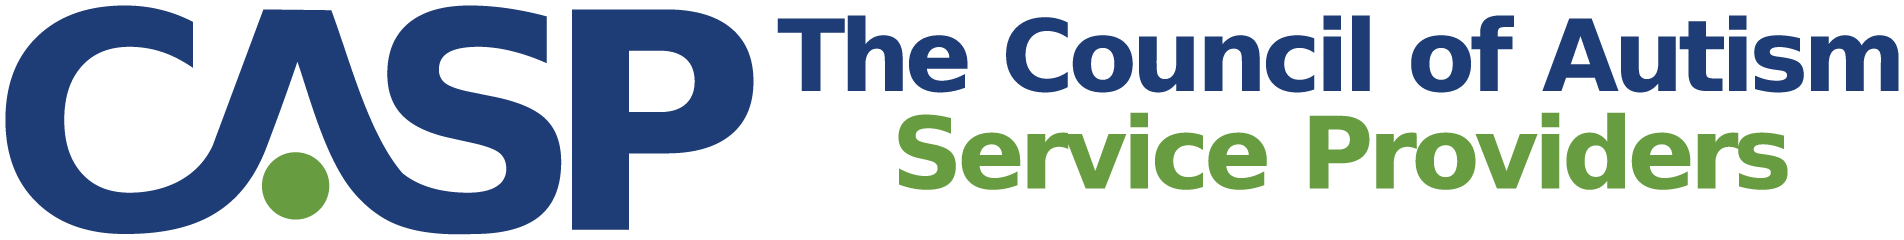 Council of Autism Service Providers Logo